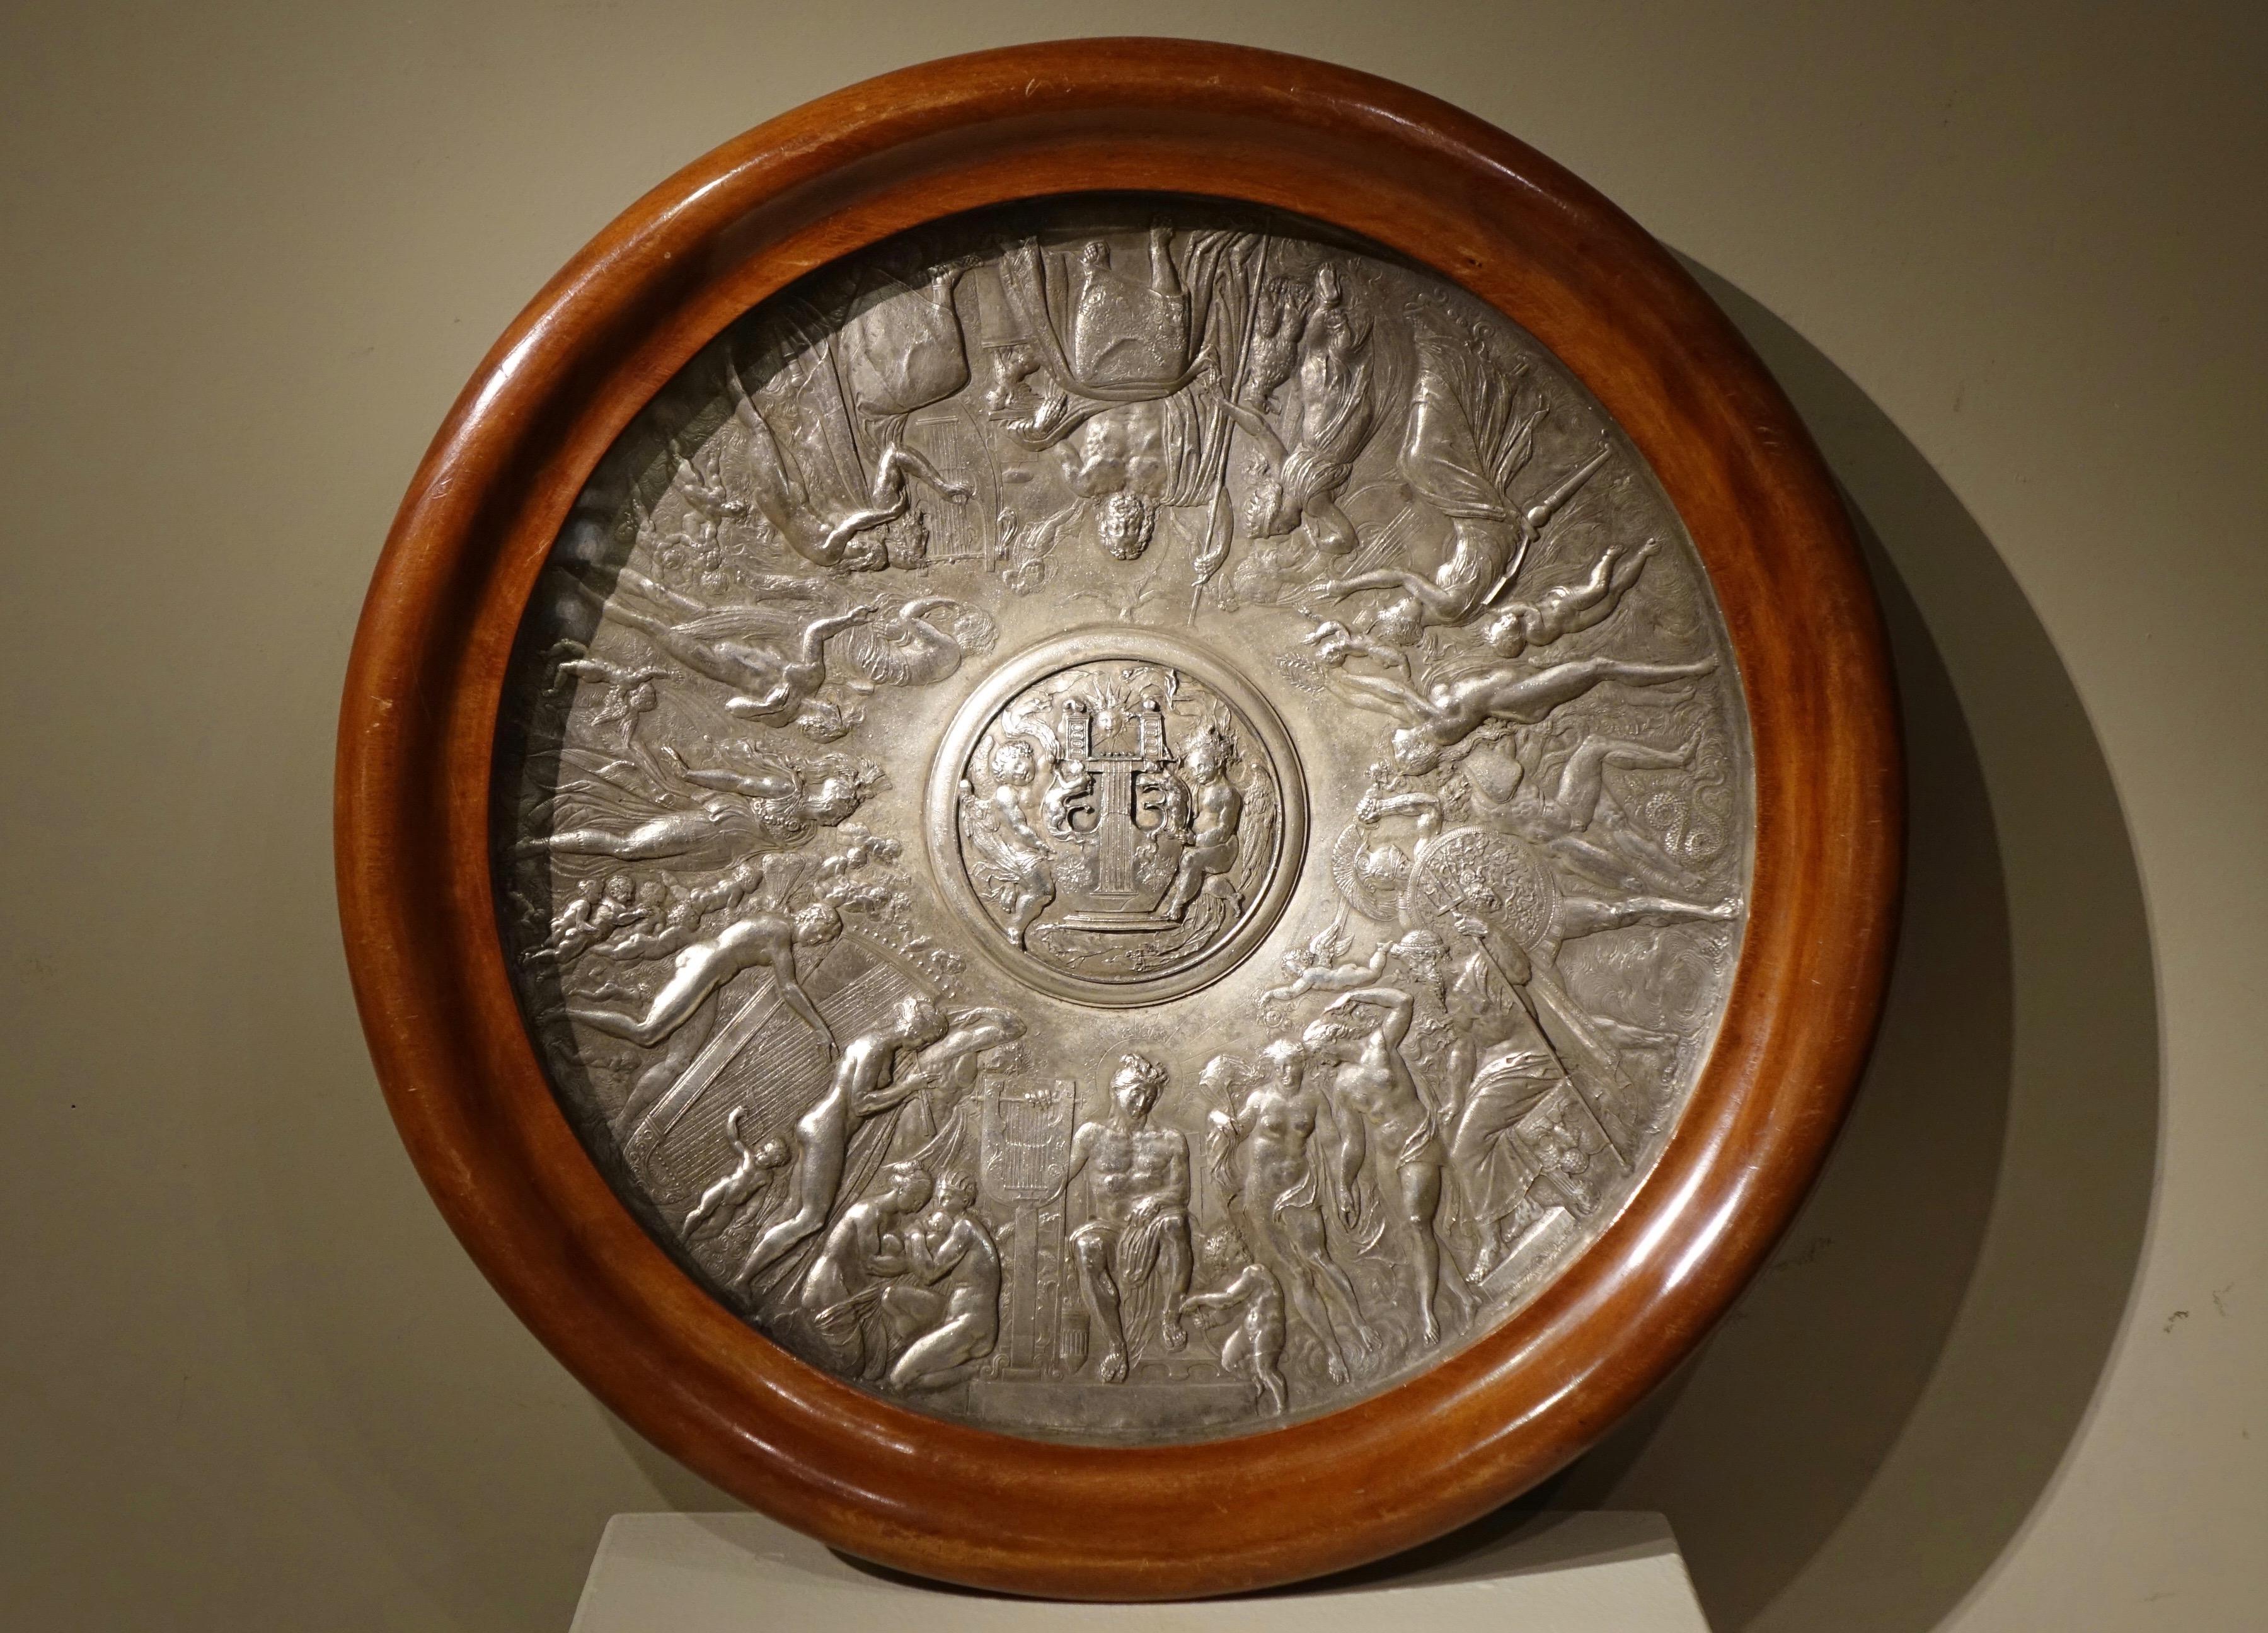 Circular plate in galvanoplasty representing the Greek Pantheon, on the edge of a central lyre figure surrounded by two winged cherubs.
Very fine work (this method generally gives coarser achievements) of the end of the 19th century.
Galvanoplasty